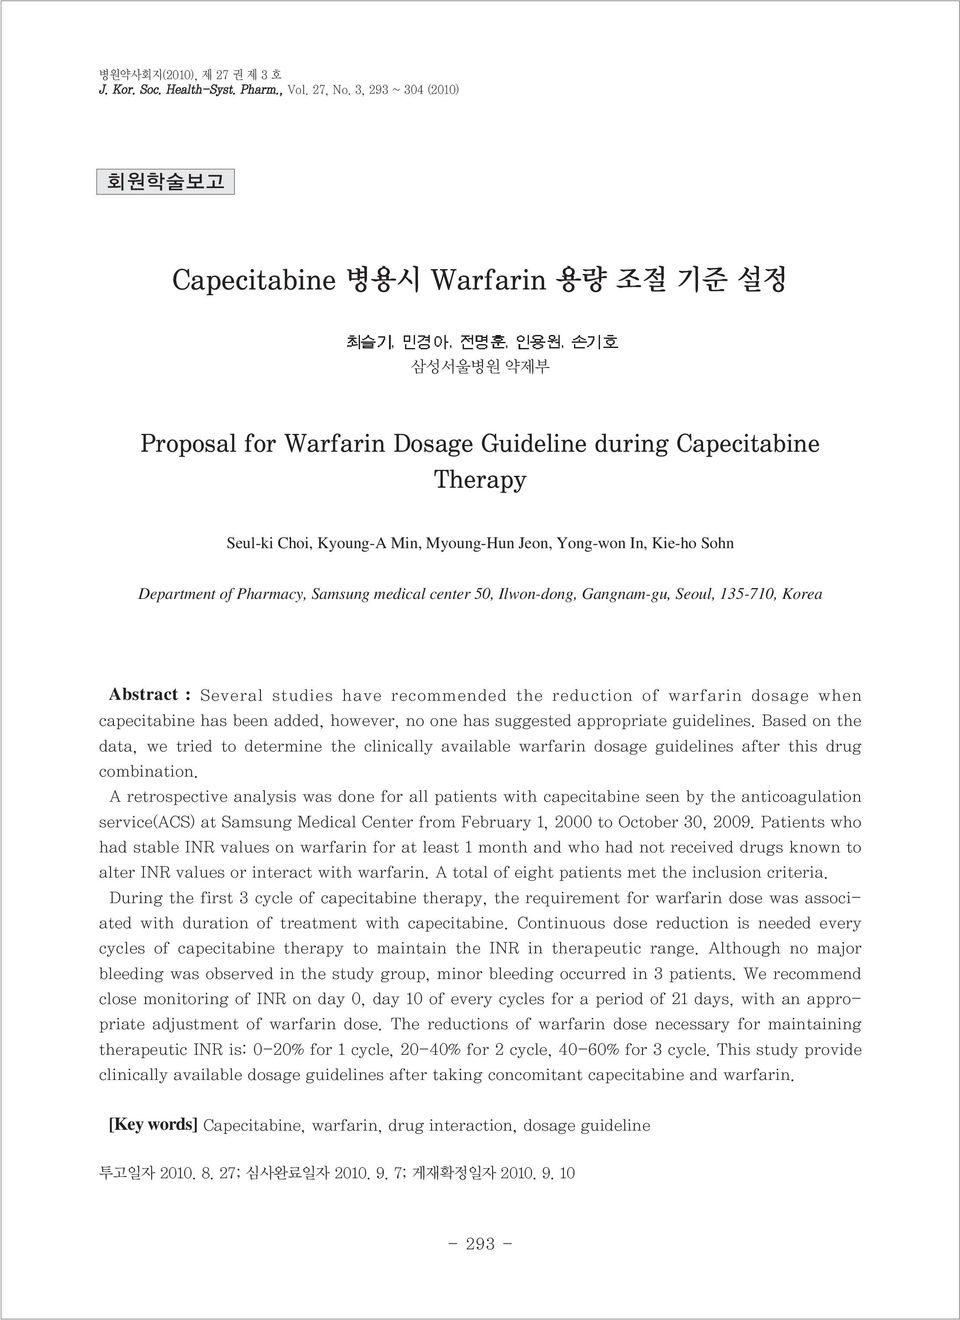 Sohn Department of Pharmacy, Samsung medical center 5, Ilwondong, Gangnamgu, Seoul, 13571, Korea Abstract : Several studies have recommended the reduction of warfarin dosage when capecitabine has